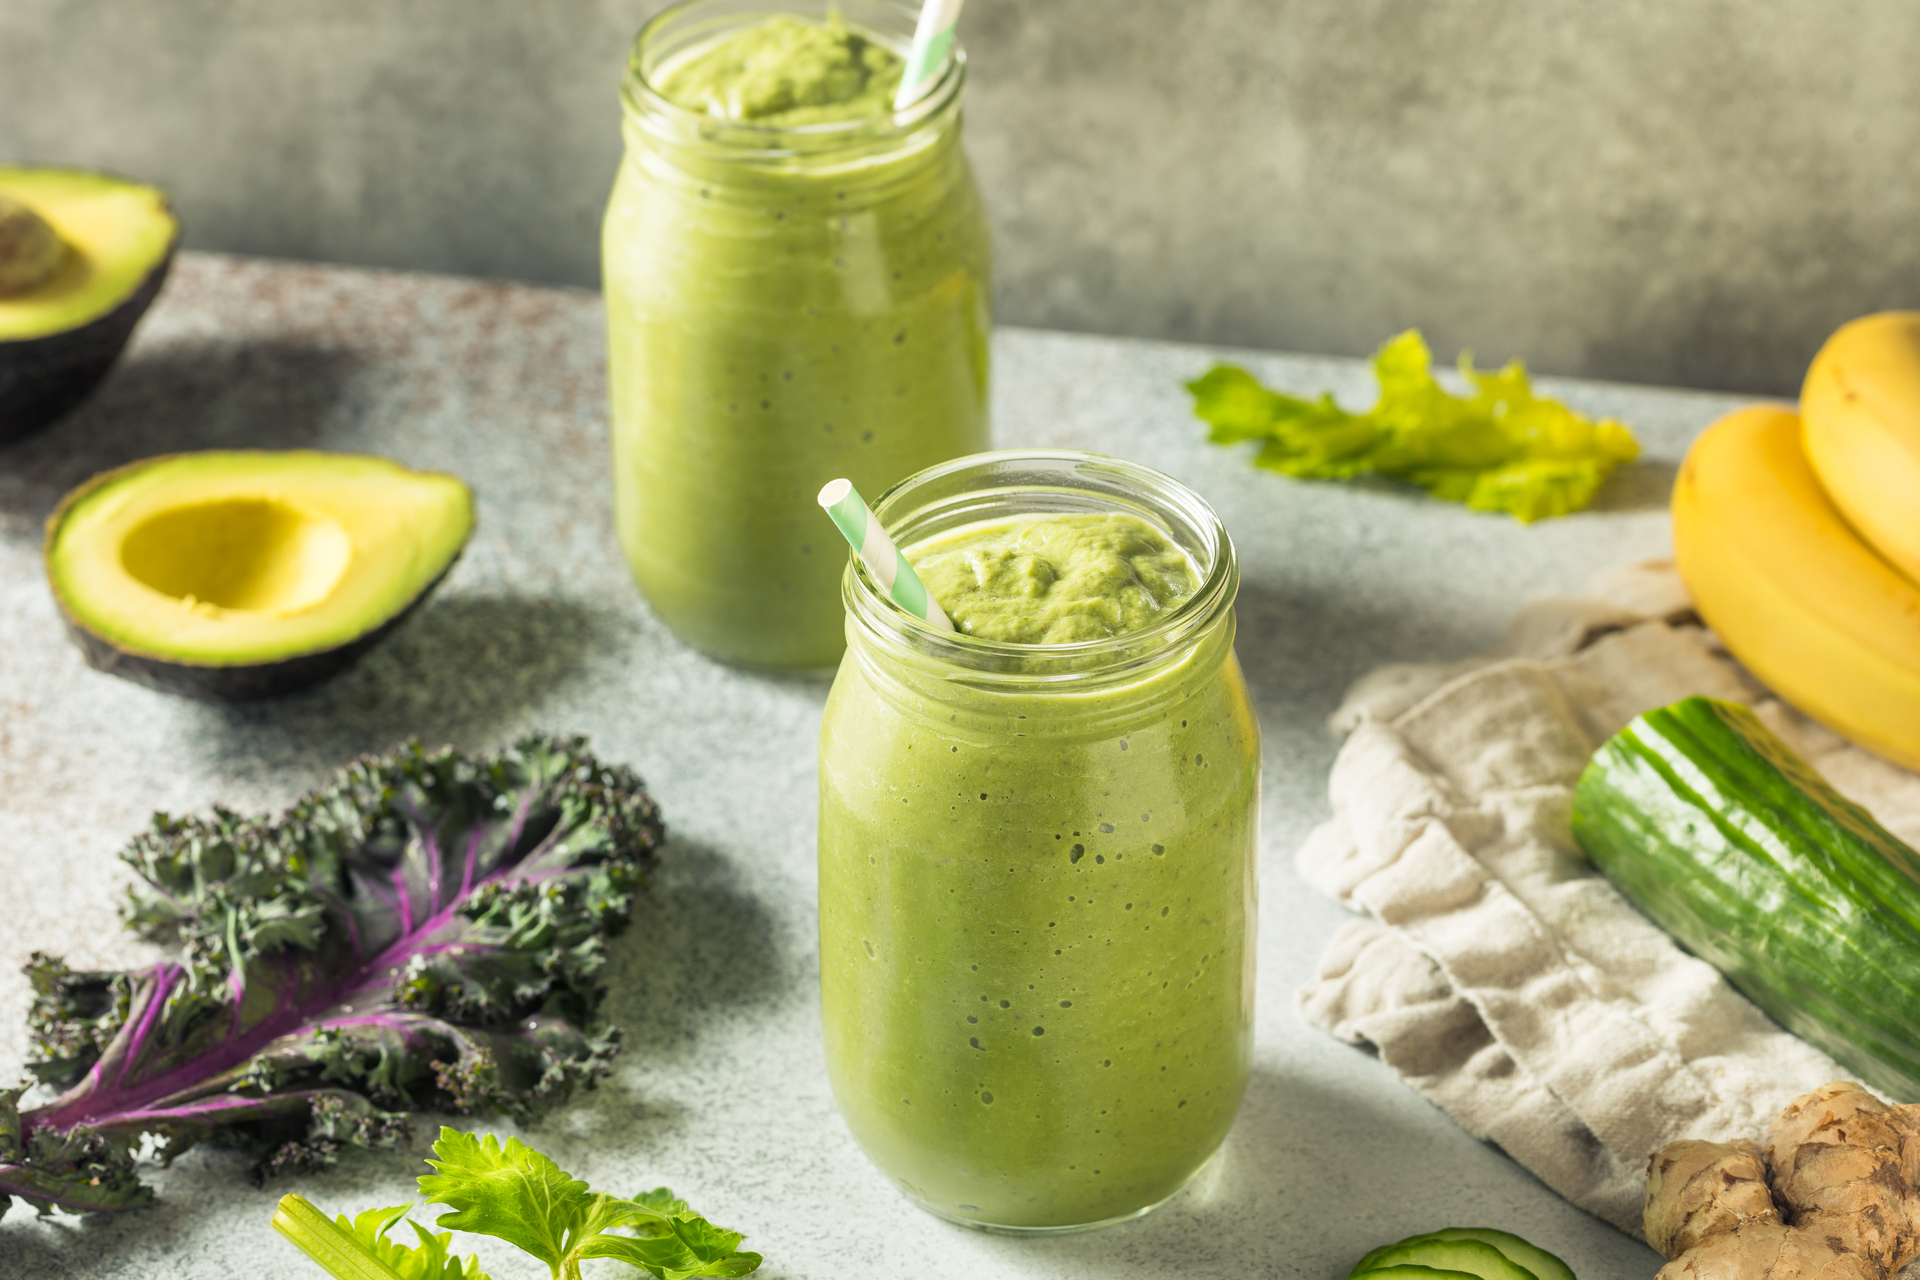 Avocado Kale Pineapple Smoothie for Weight Loss